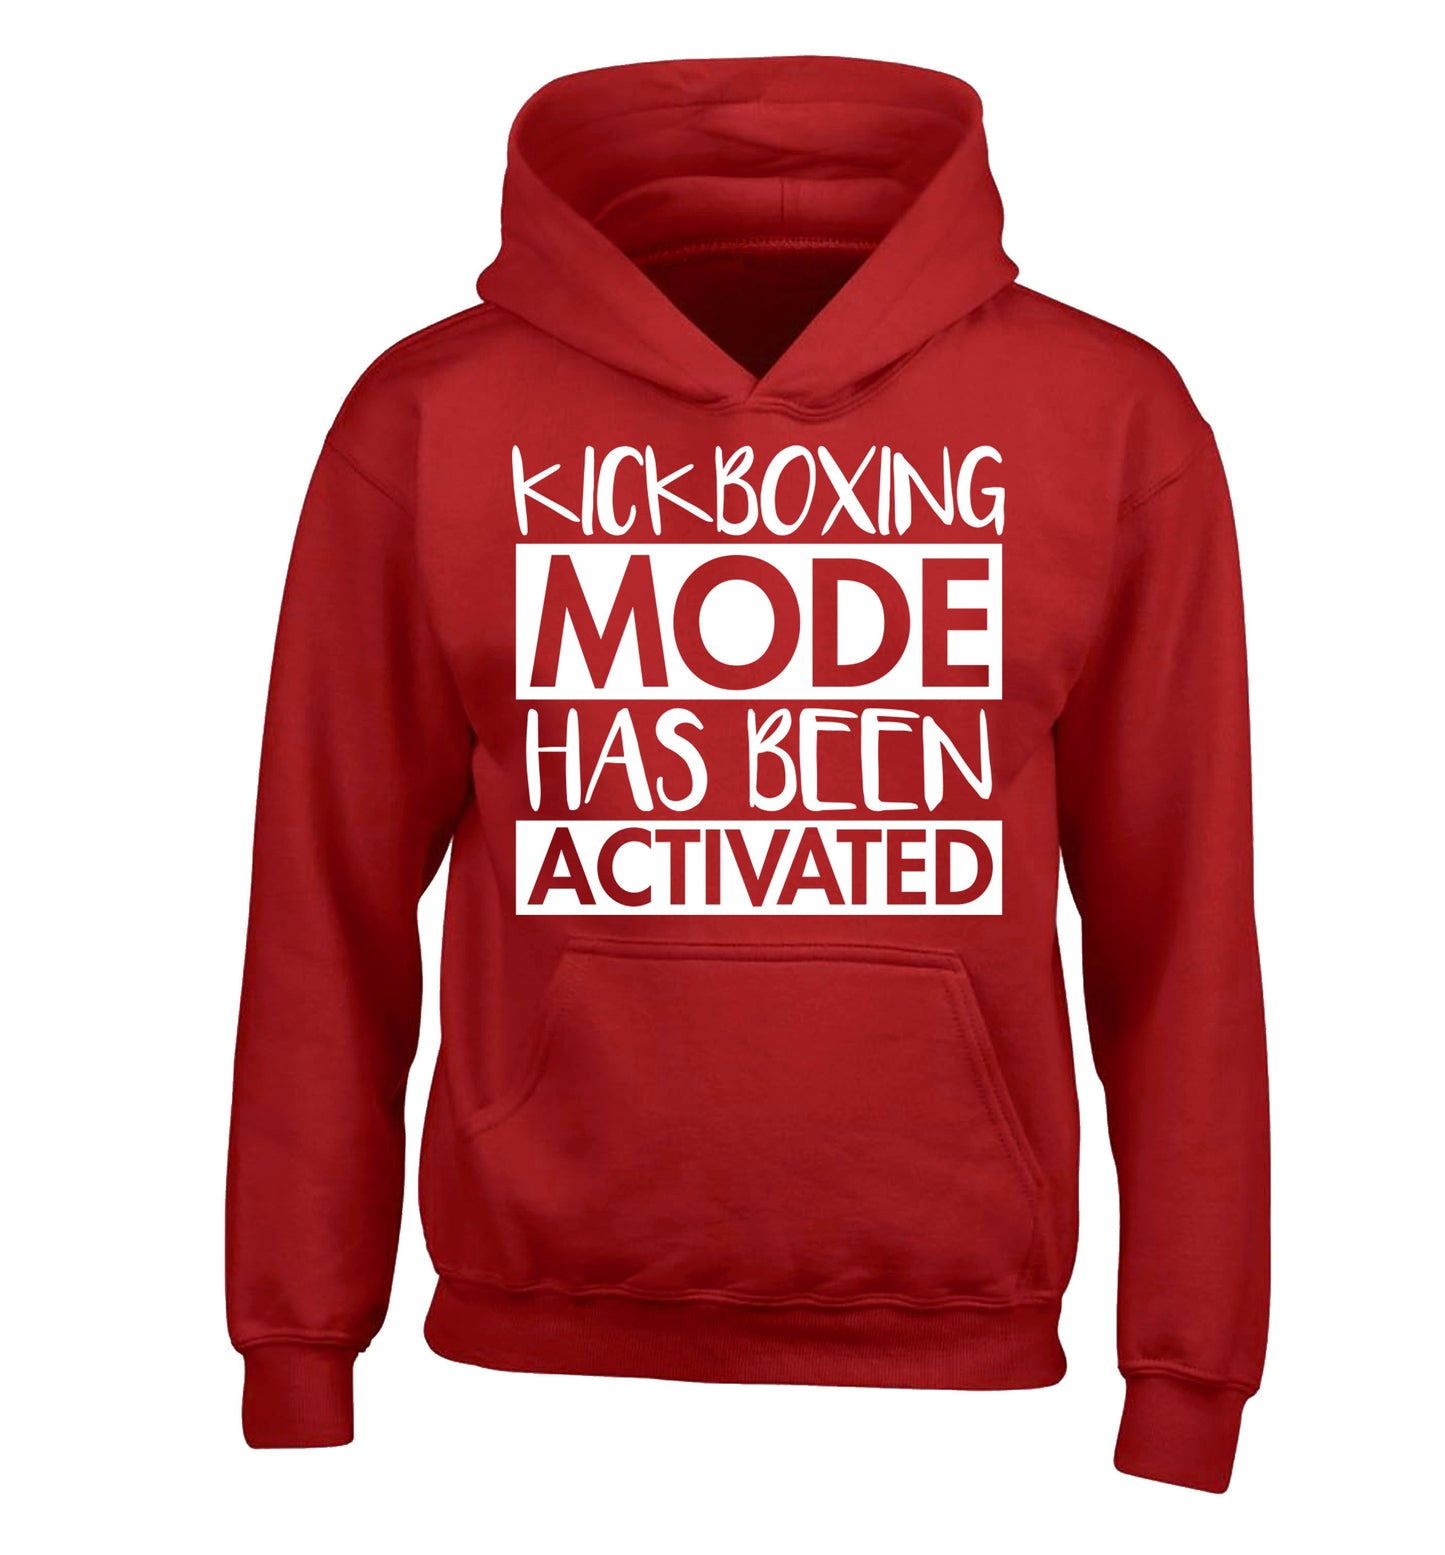 Kickboxing mode activated children's red hoodie 12-14 Years